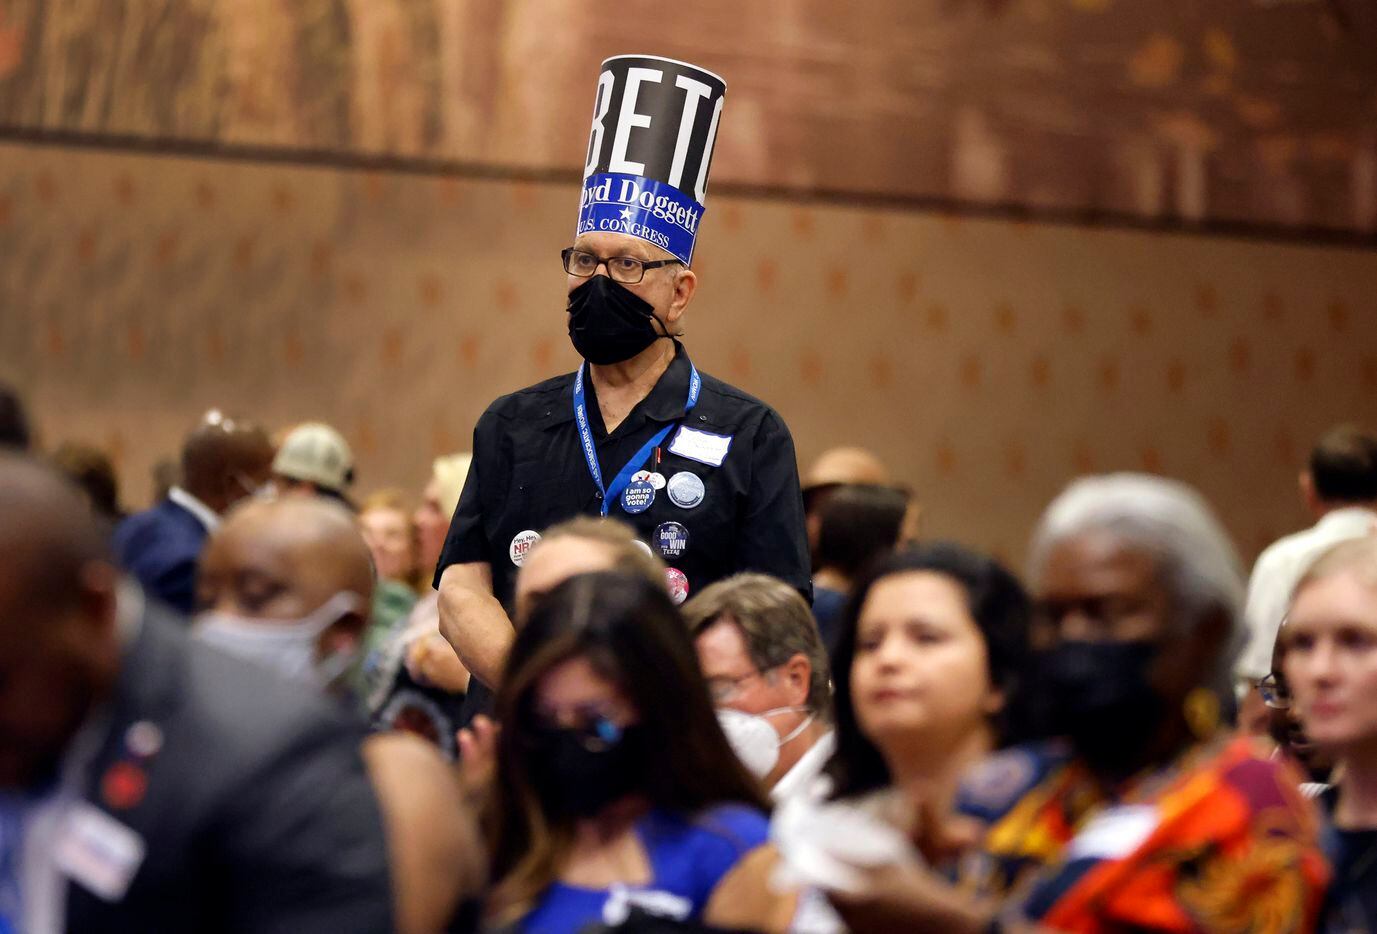 John Denson of Pflugerville, Texas wore a campaign hat in the style of Abe Lincoln to a...